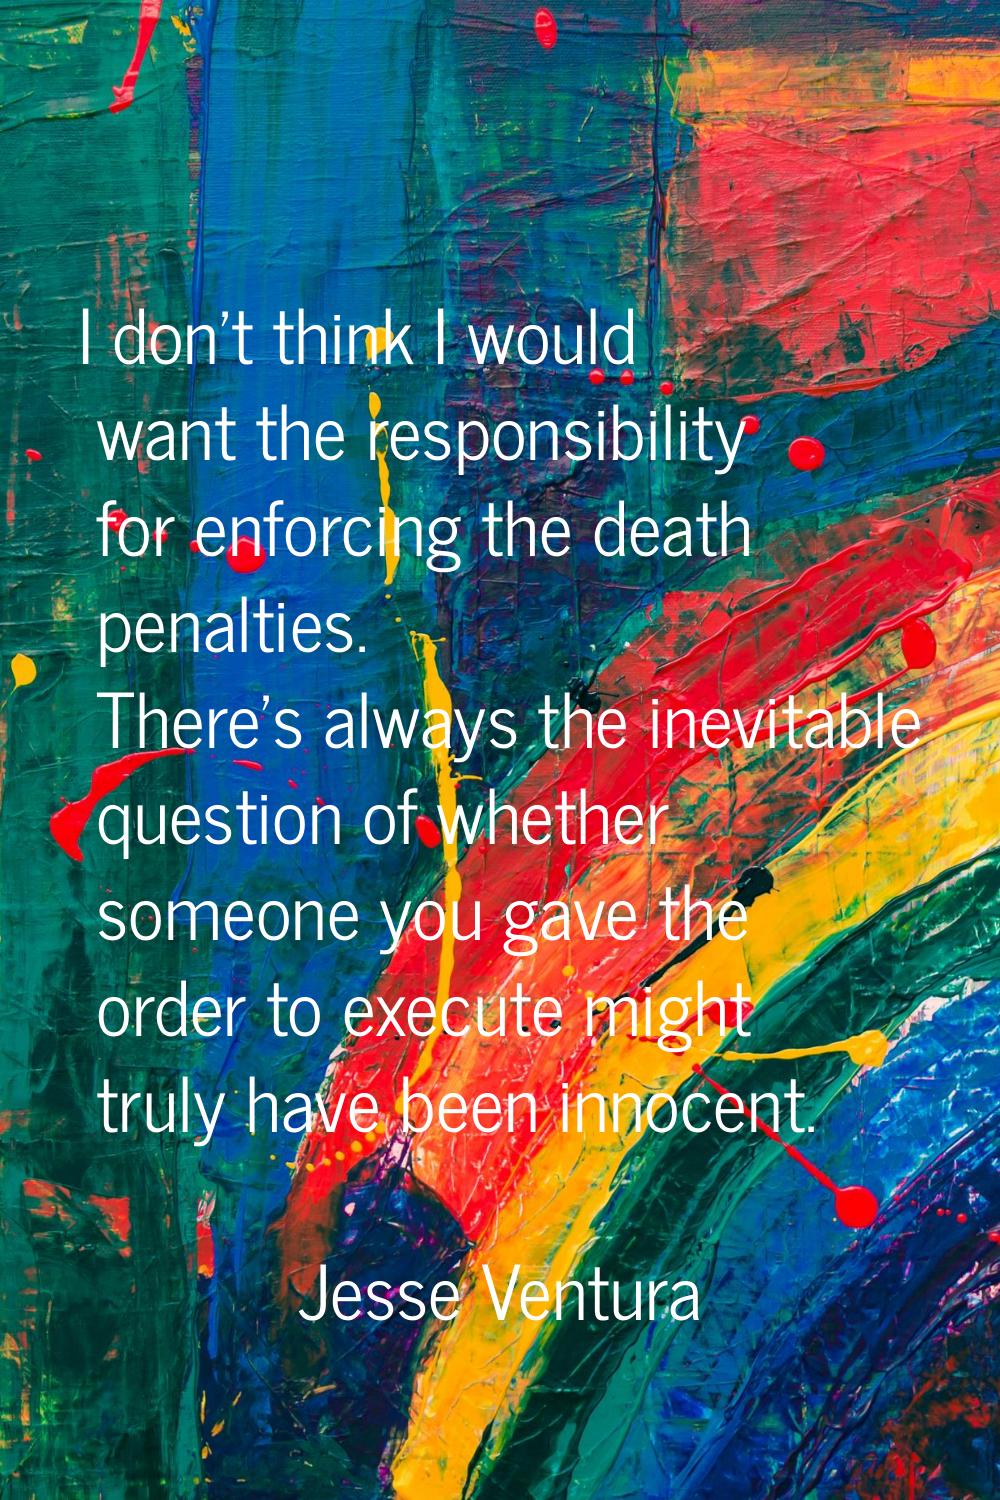 I don't think I would want the responsibility for enforcing the death penalties. There's always the